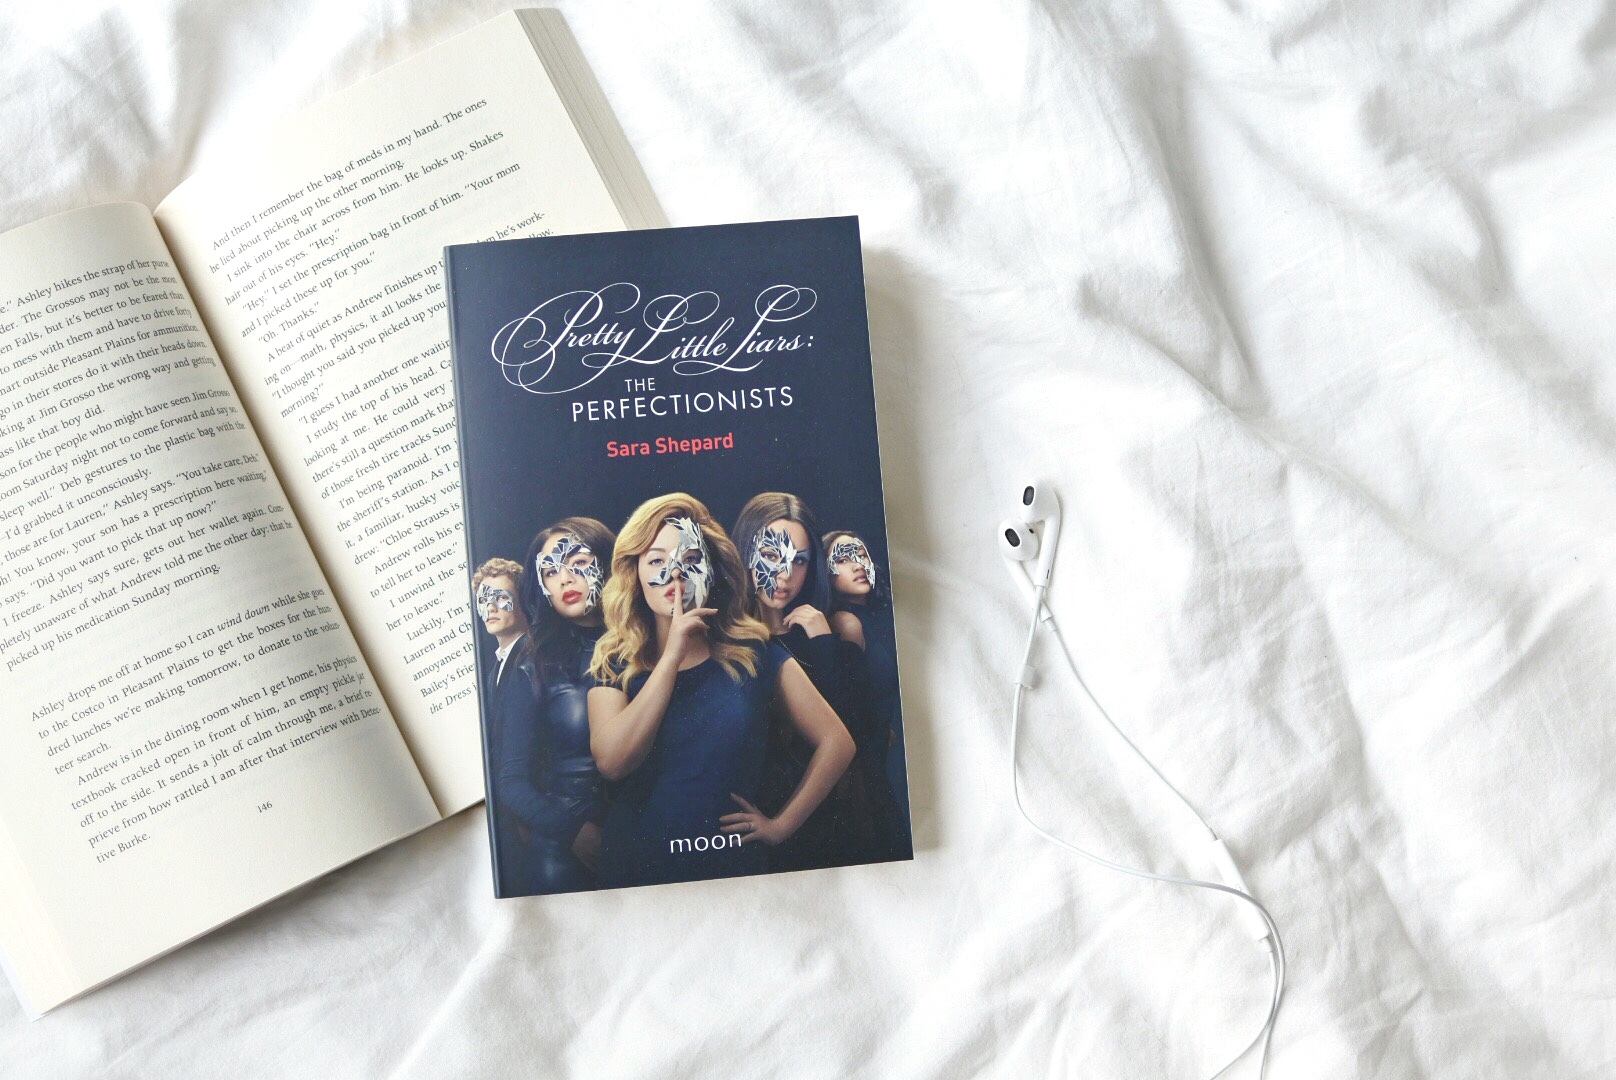 the perfectionist book by sara shepard